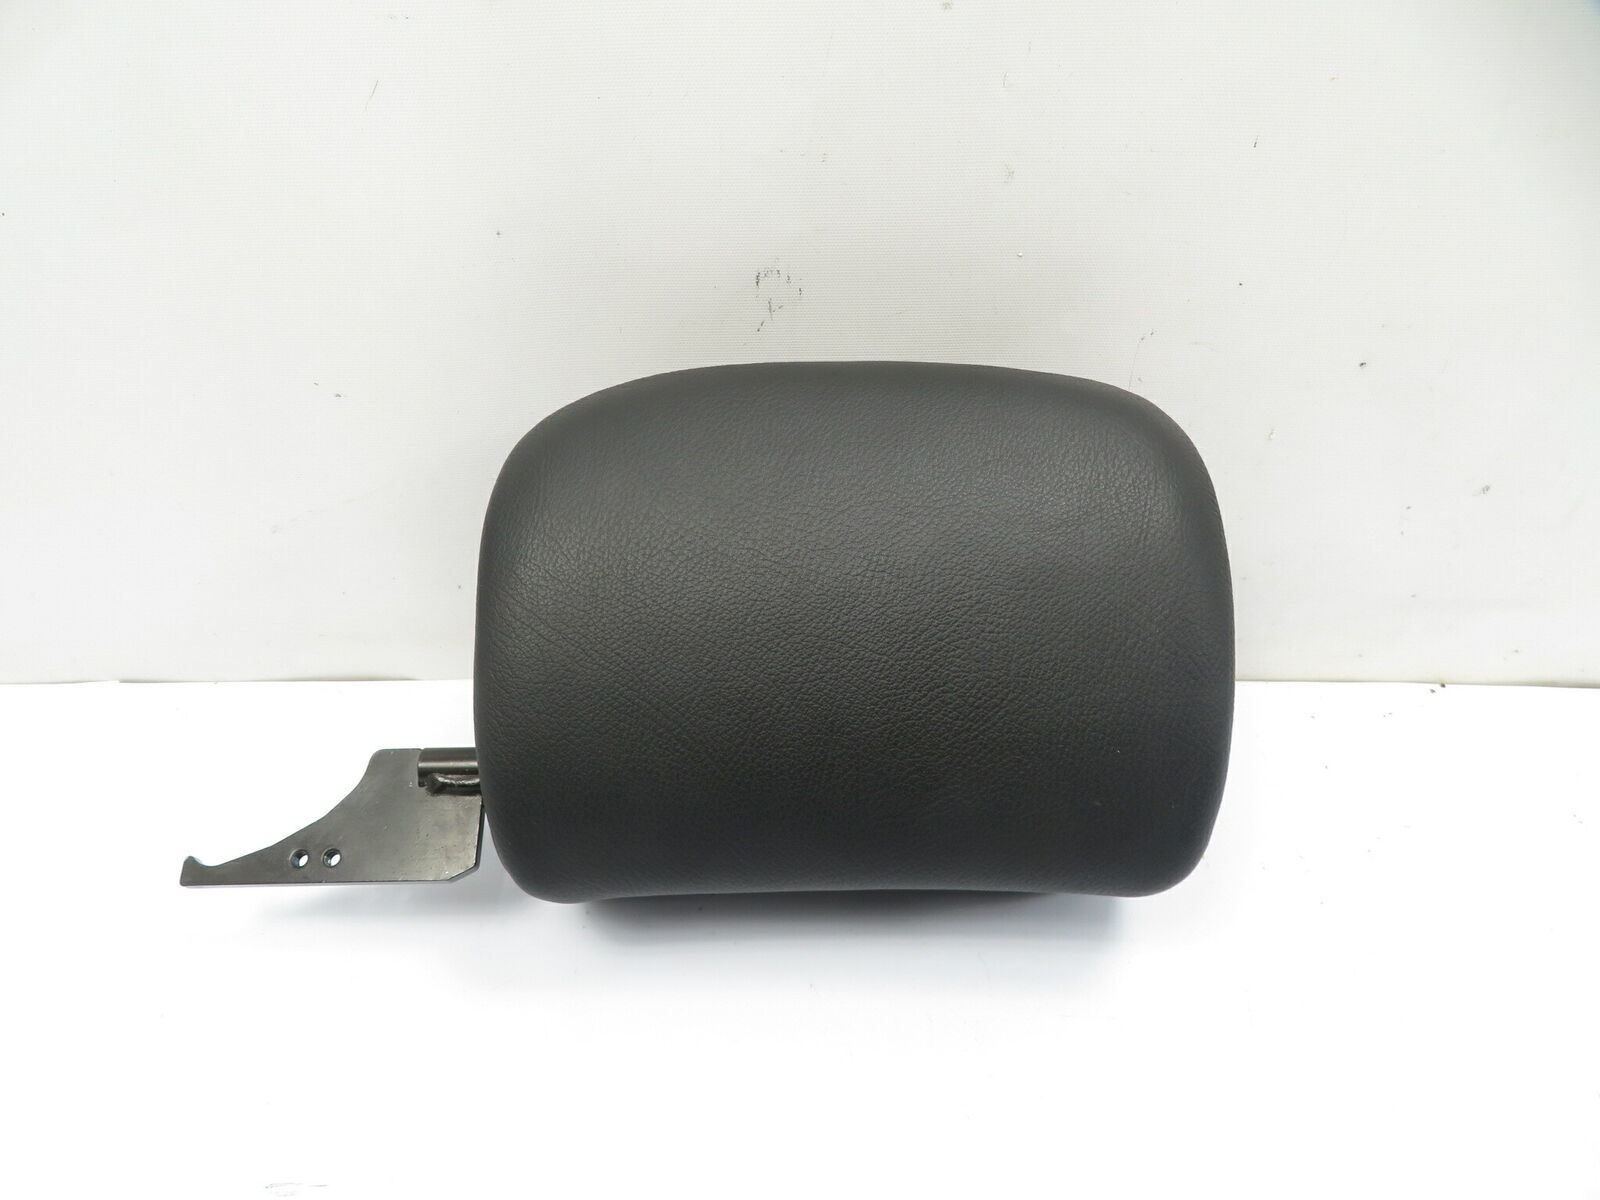 Primary image for BMW 325ci E46 Headrest, Montana Leather, Front Right Black Convertible